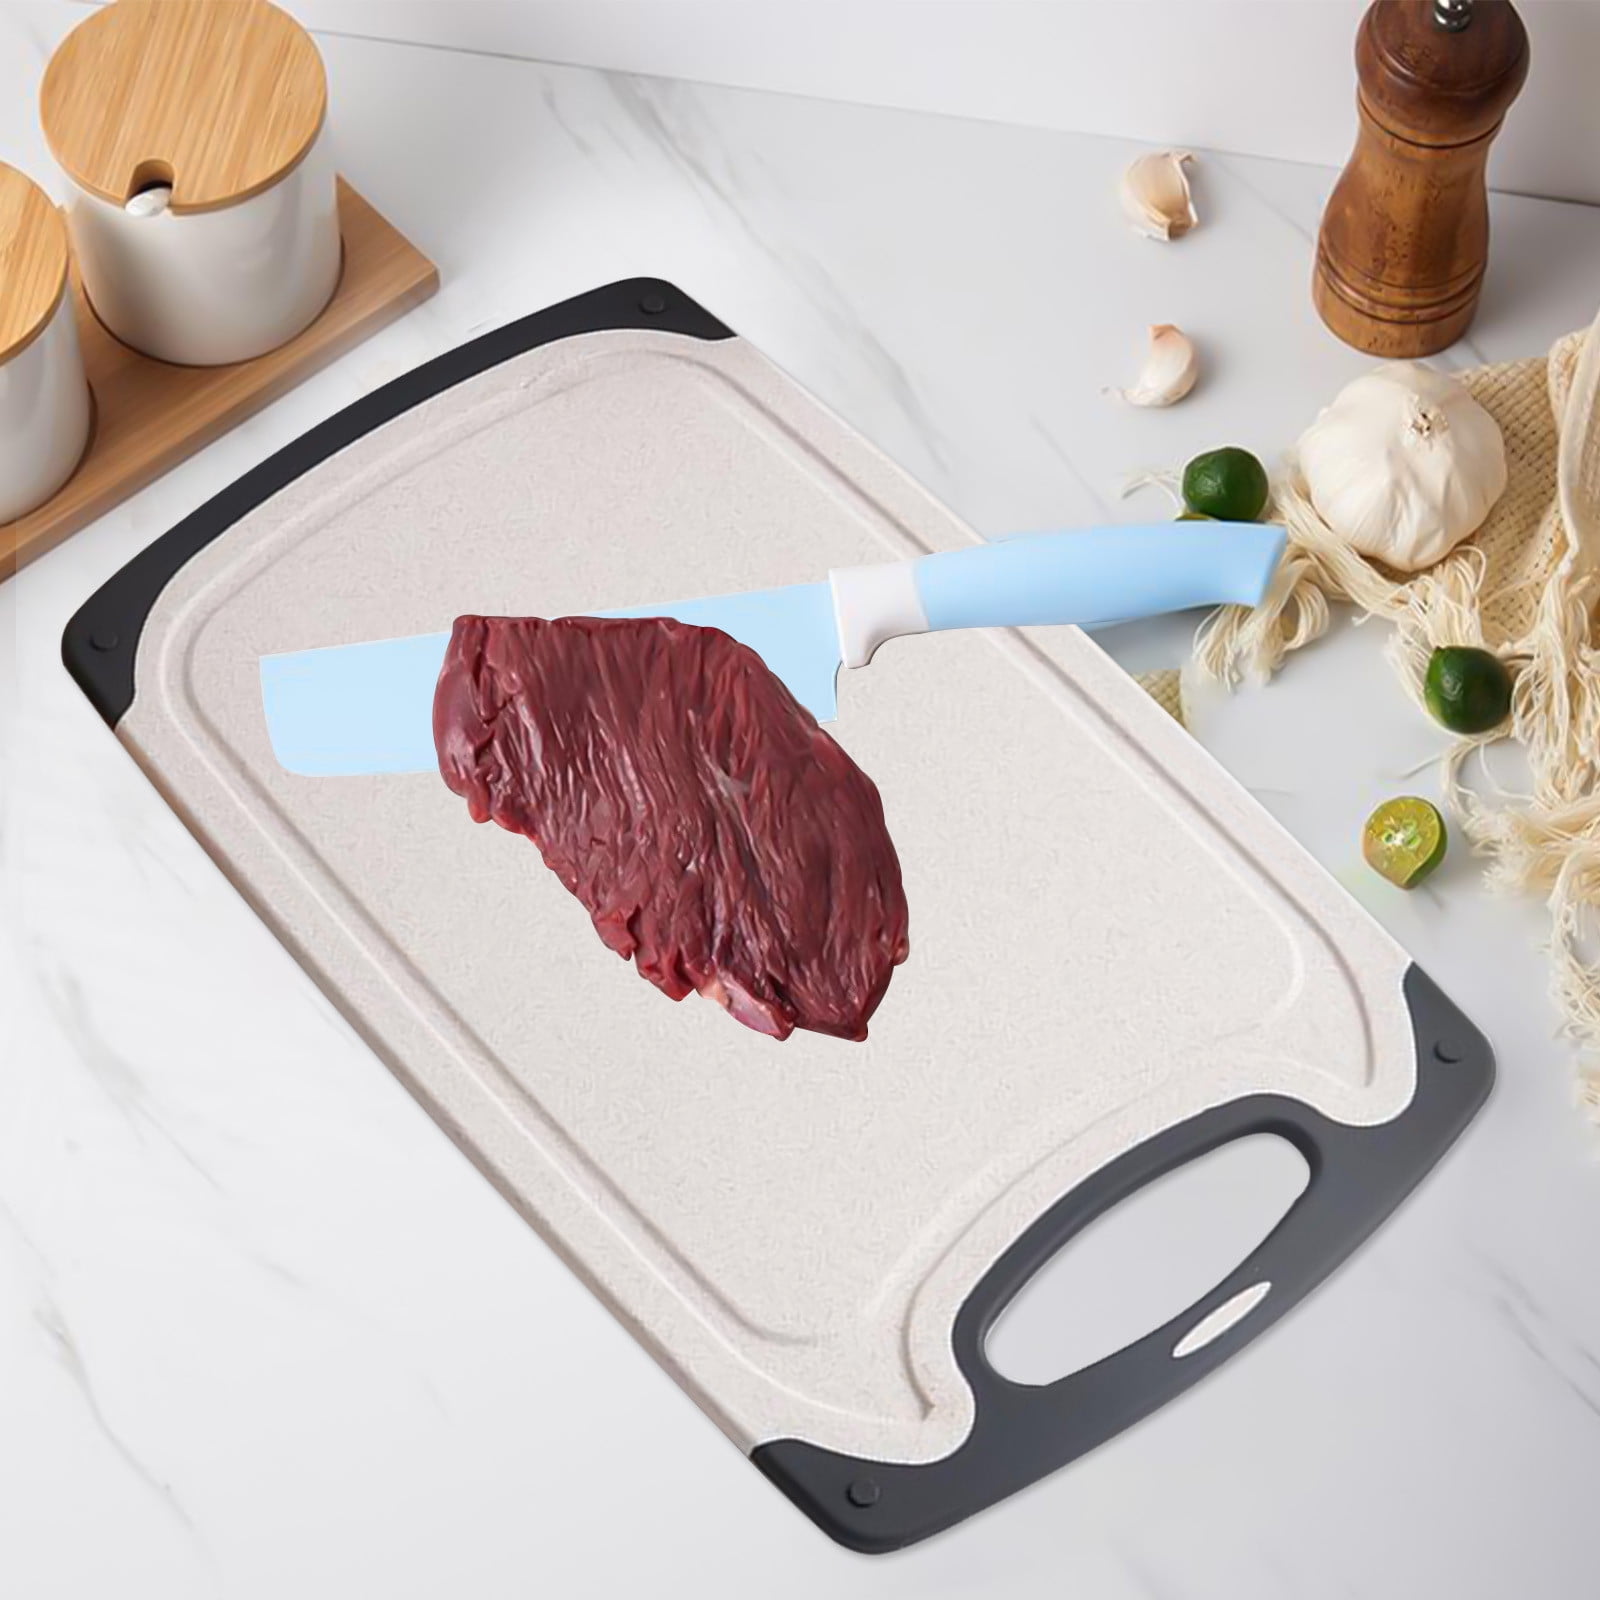 Lazuro Kitchenware - Plastic Cutting Boards for Kitchen - 3 Pieces Chopping Board for Meat, Vegetables with Non-Slip Feet and Juice Grooves, Easy Grip